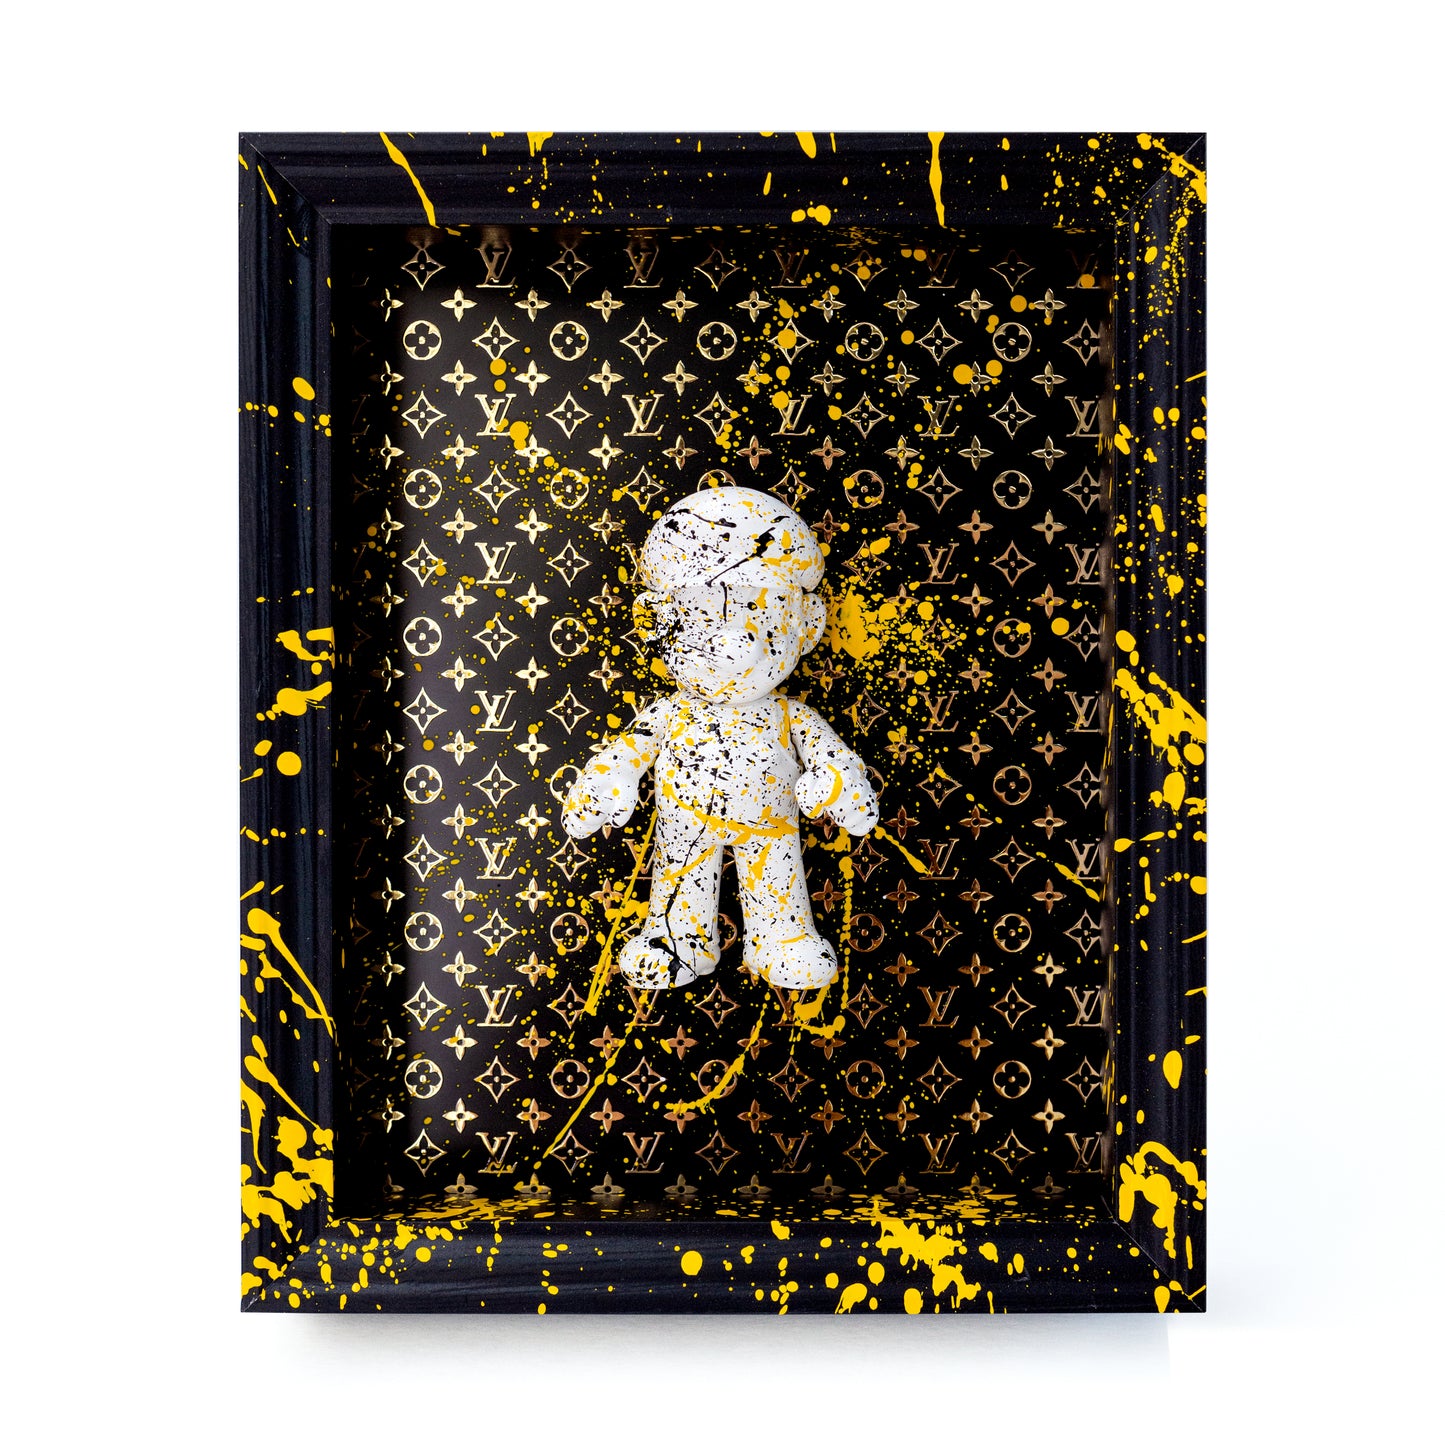 Mario doll (12cm) handfinished | Black and Yellow, Louis Vuitton